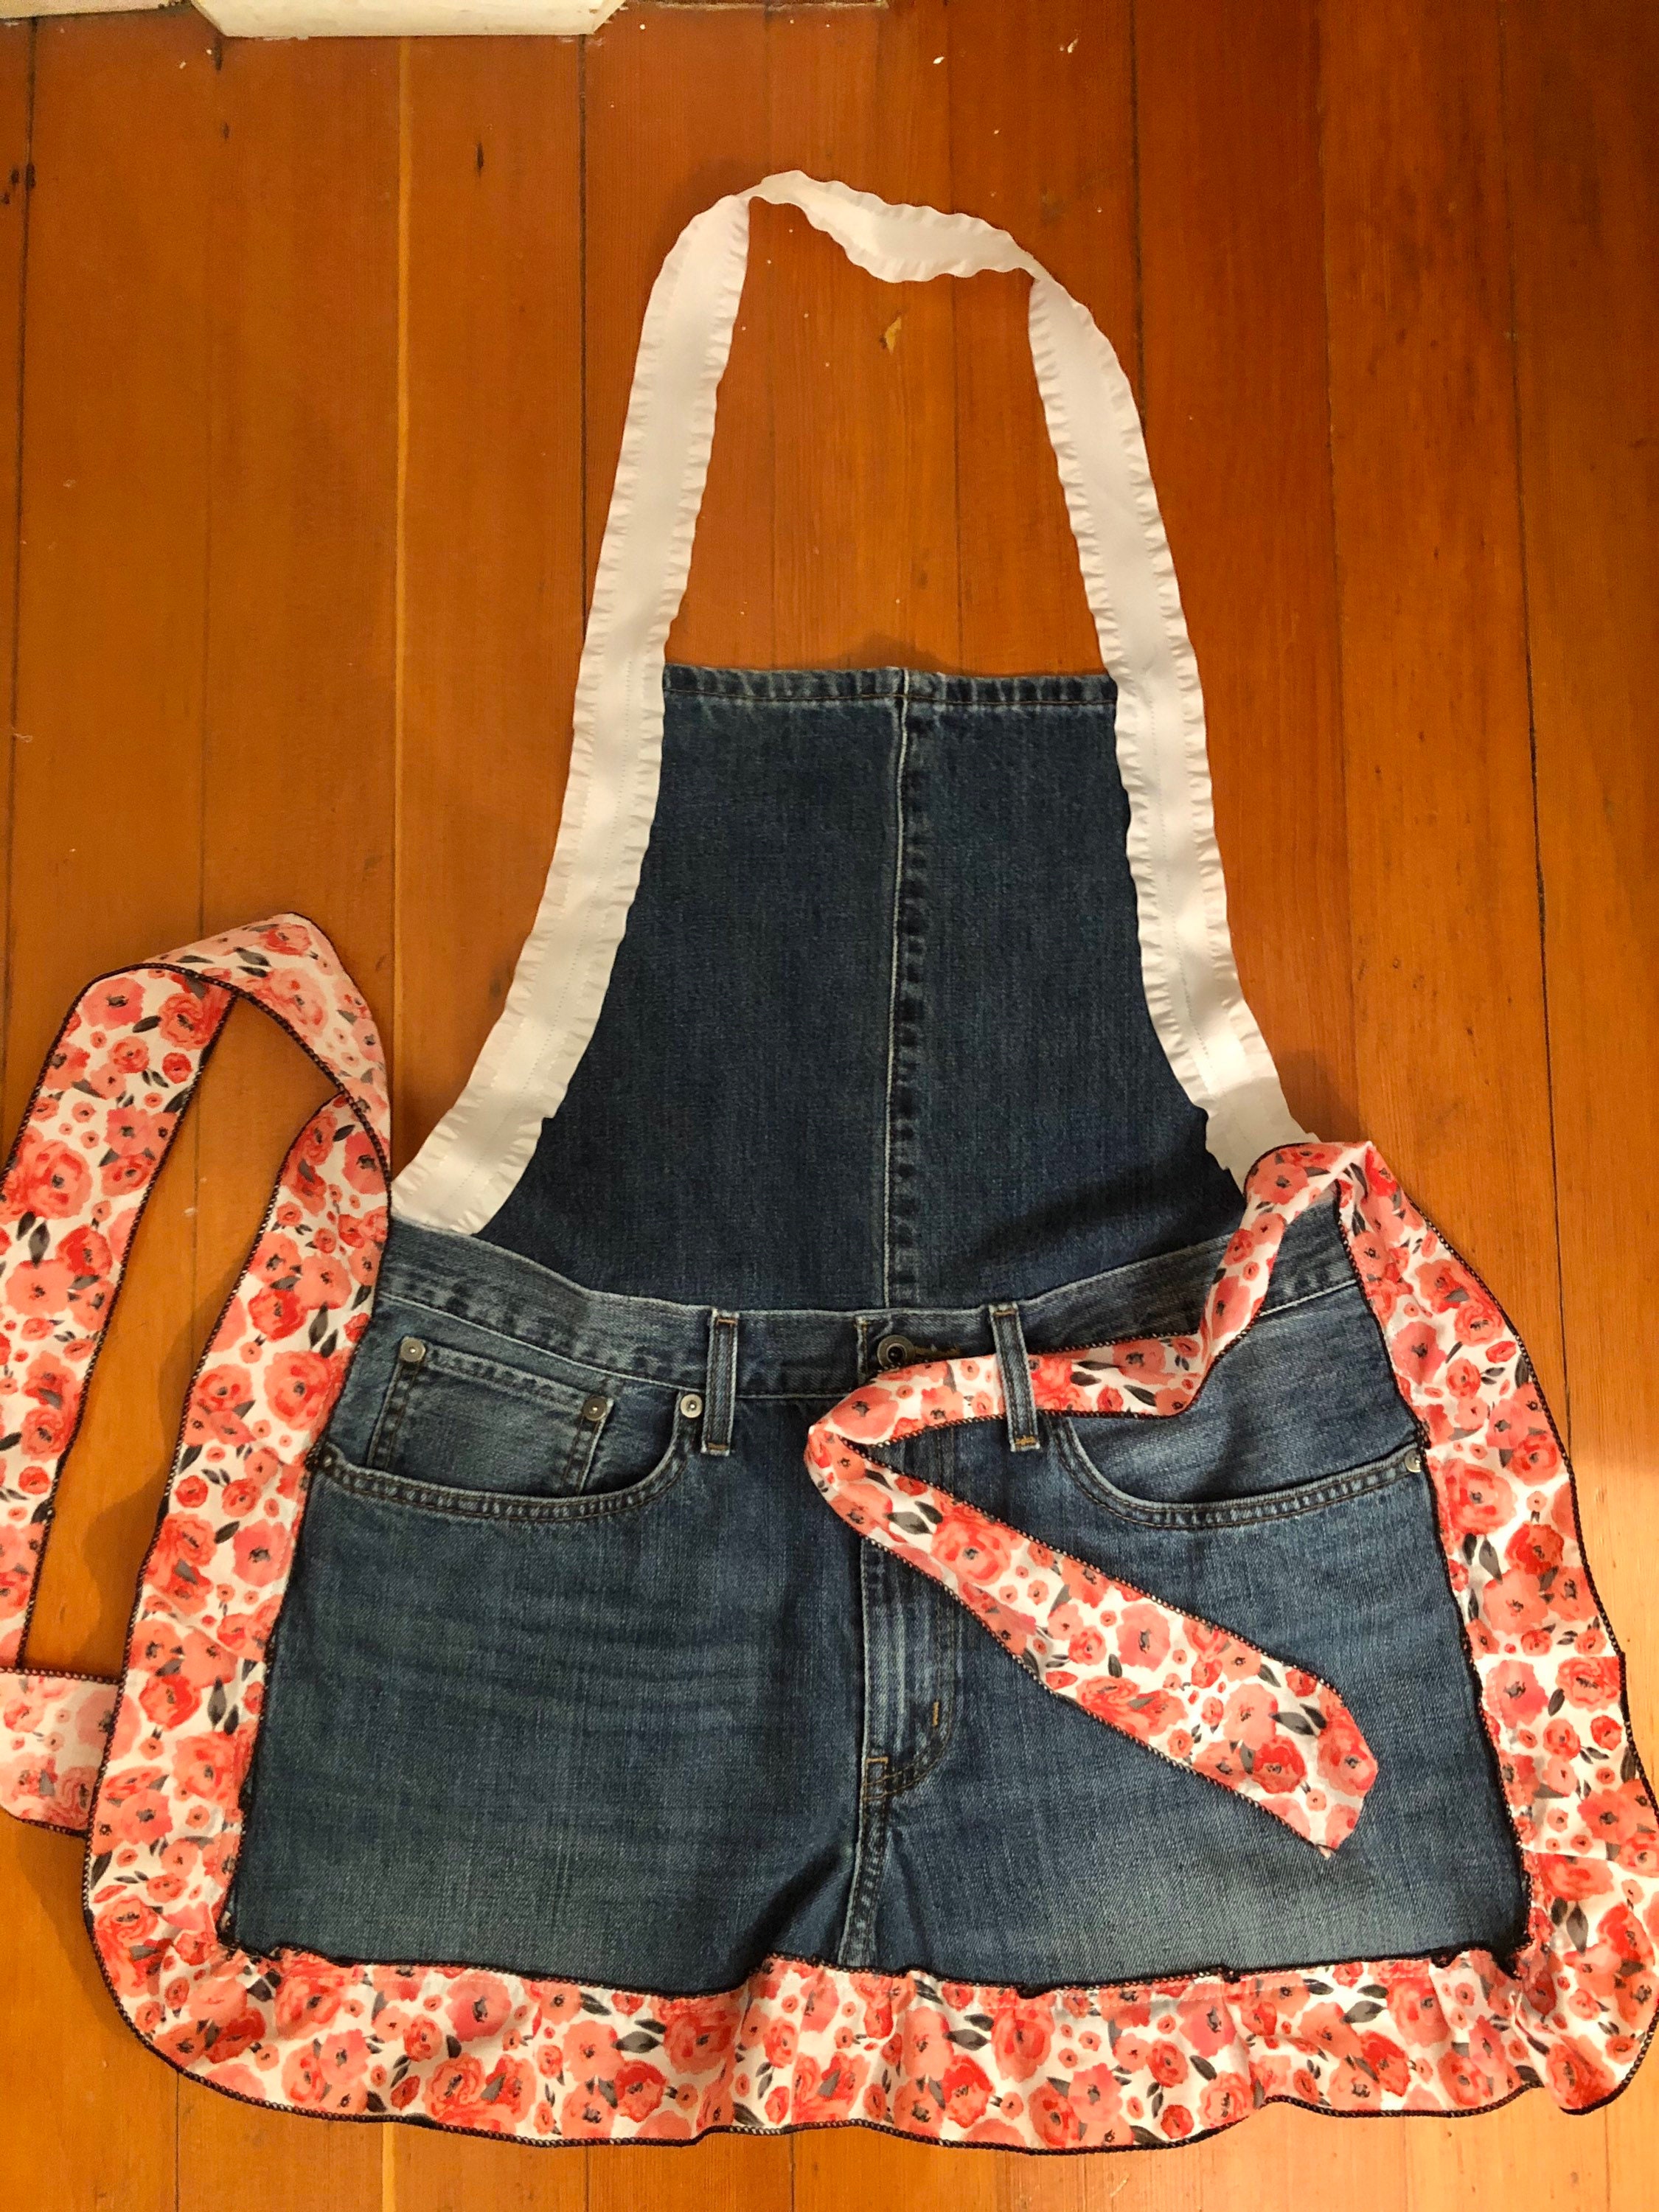 BlueJean apron with ruffles and built-in pockets. So | Etsy